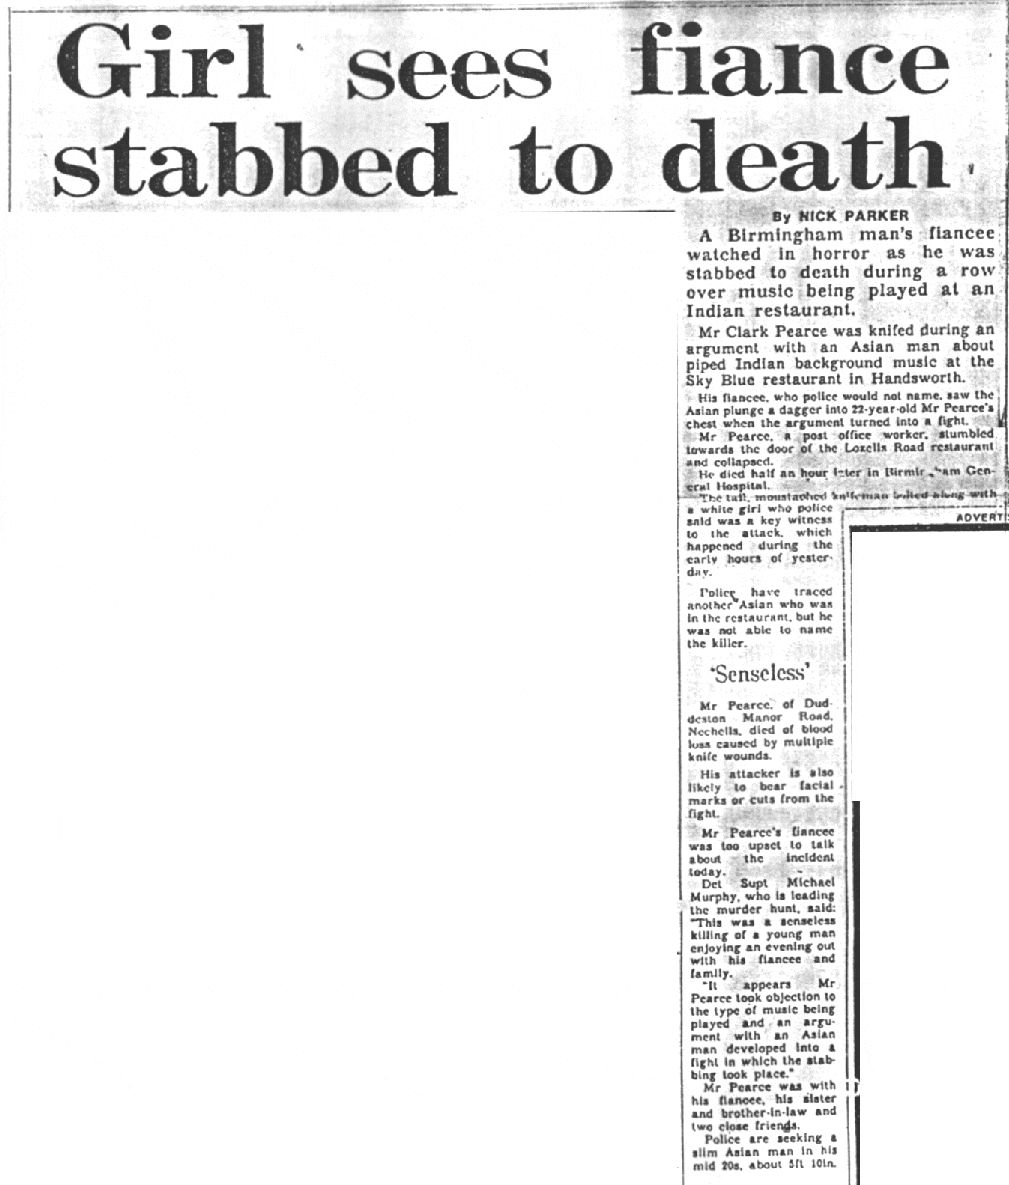 The Birmingham Evening Mail report of the murder of Clarke Pearce